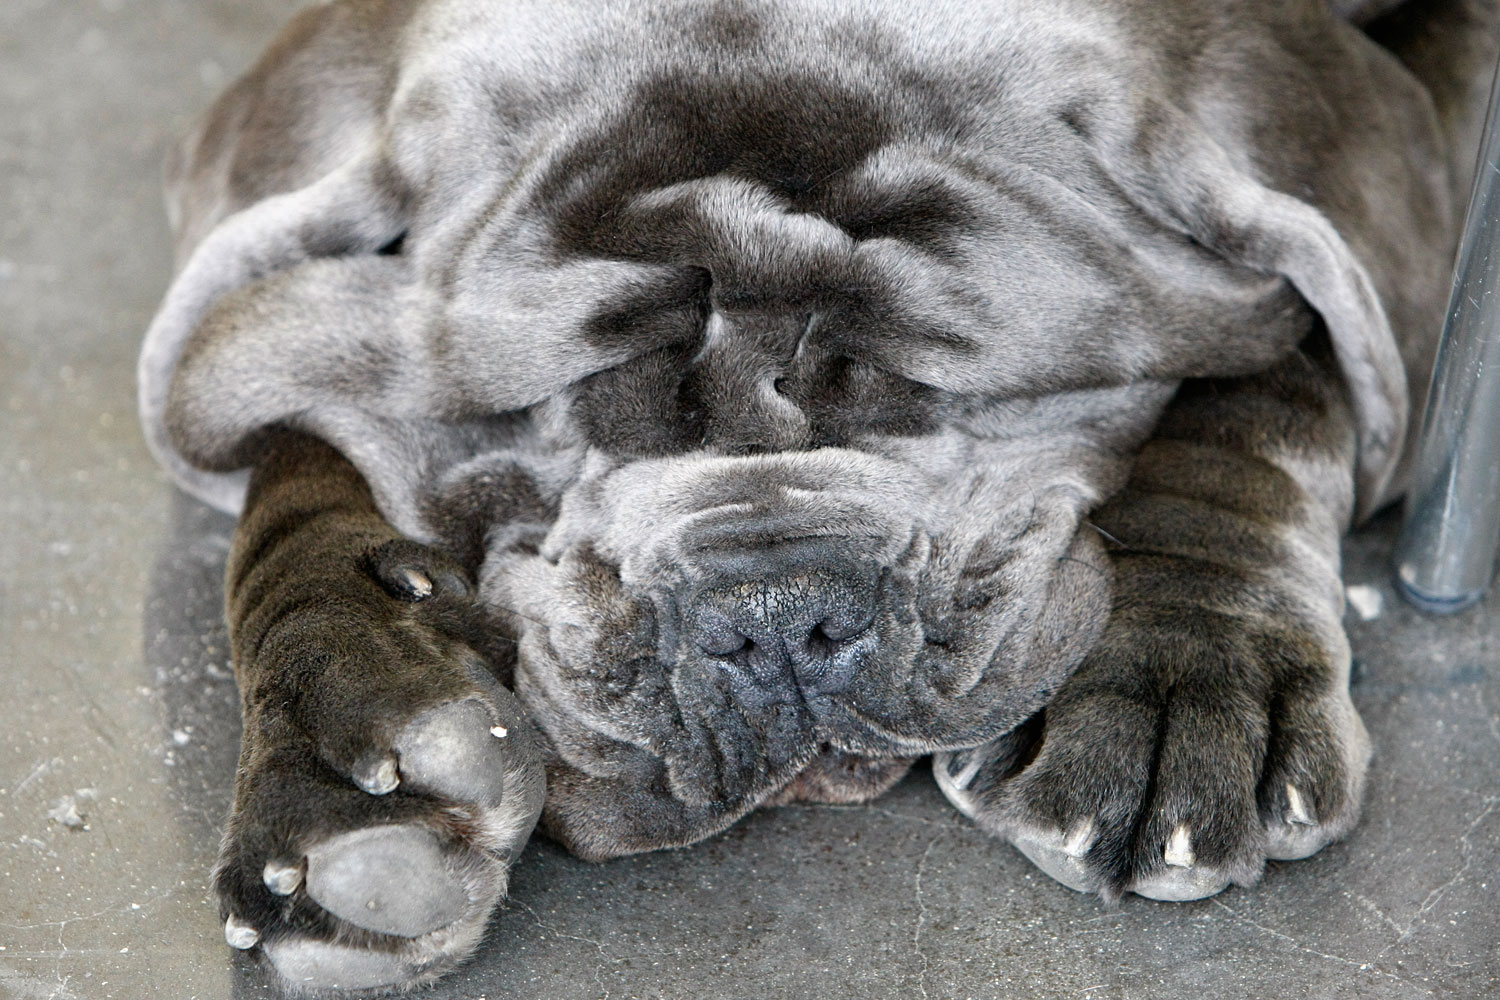 Ava, a 20-month old Mastino Napoletano, rests after winning the dog contest in her category, during the World Dog Show in Villepeinte, north of Paris.